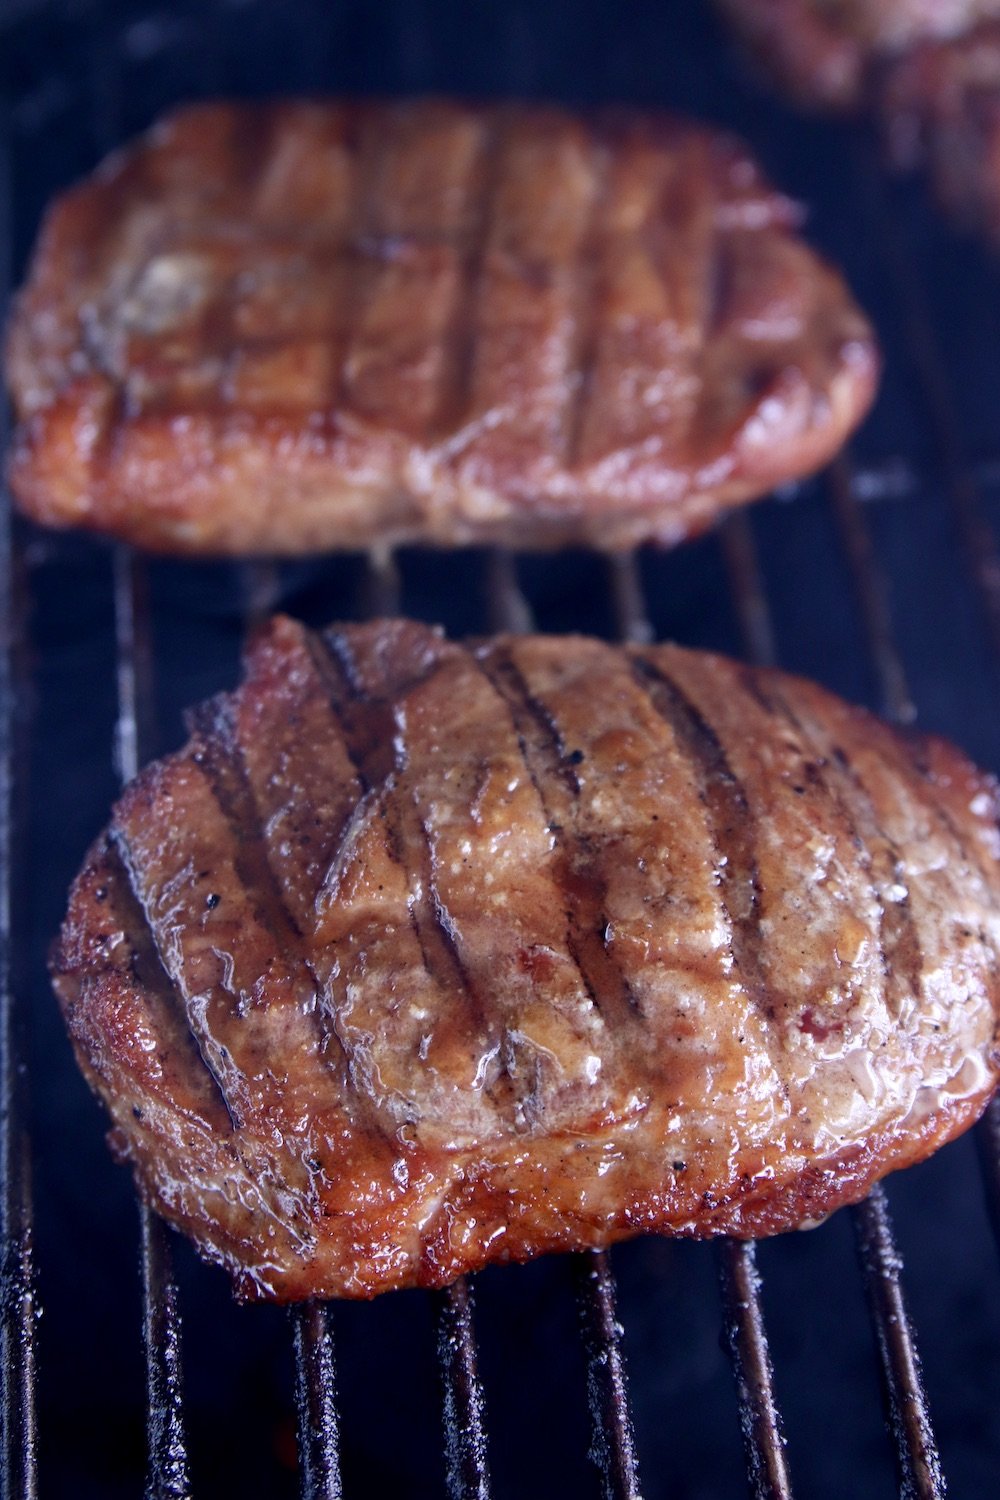 pork chops with grill marks on a grill